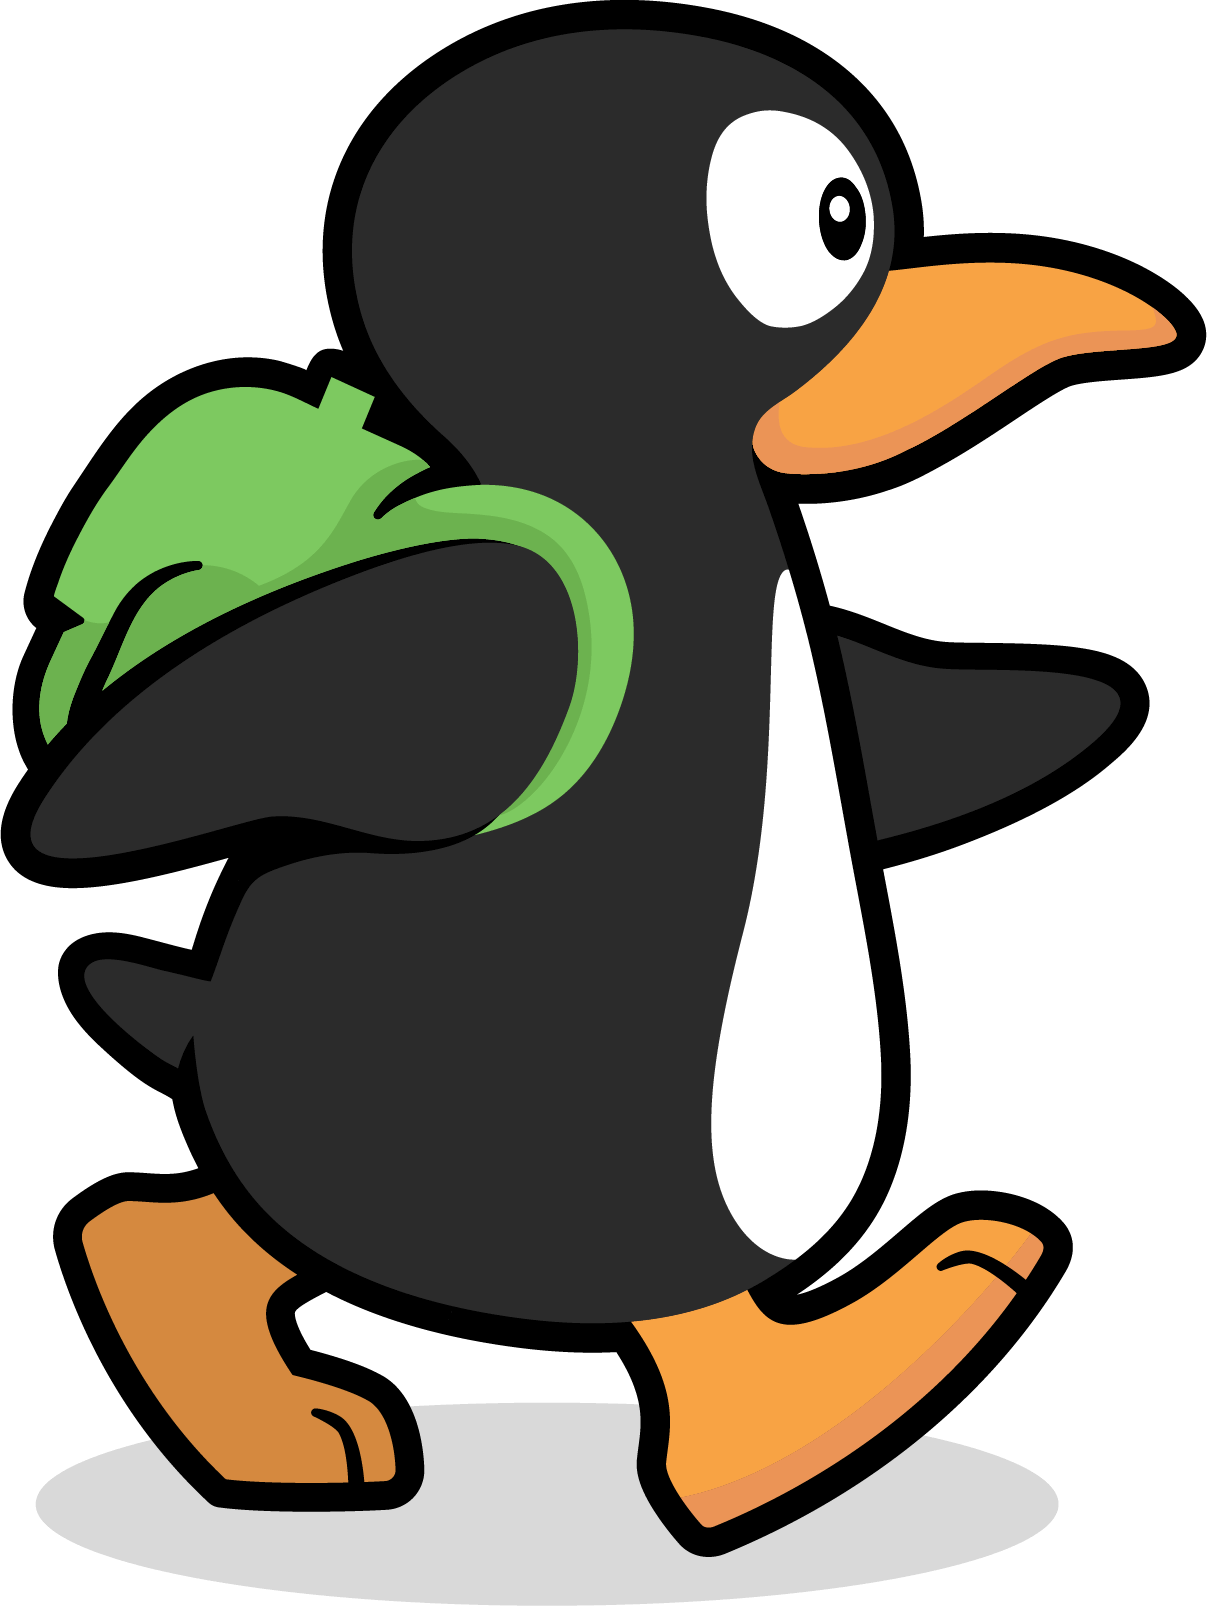 learning-loss-recovery-with-jiji-2021